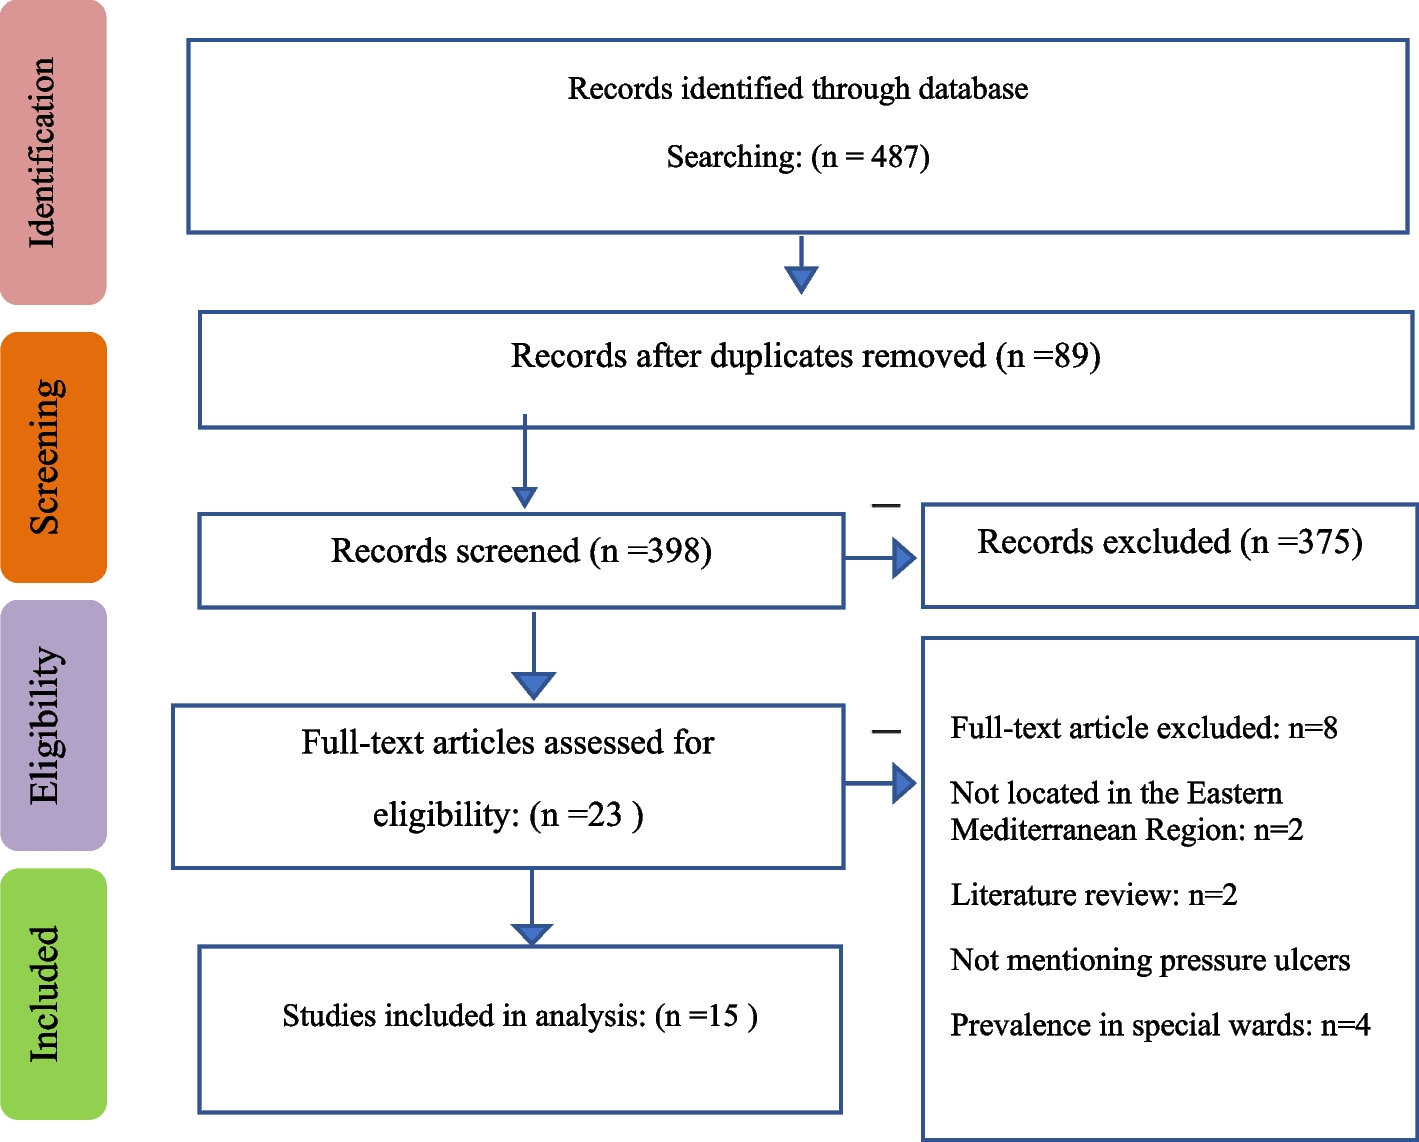 Prevalence of hospital-acquired pressure injuries in intensive care units of the Eastern Mediterranean region: a systematic review and meta-analysis